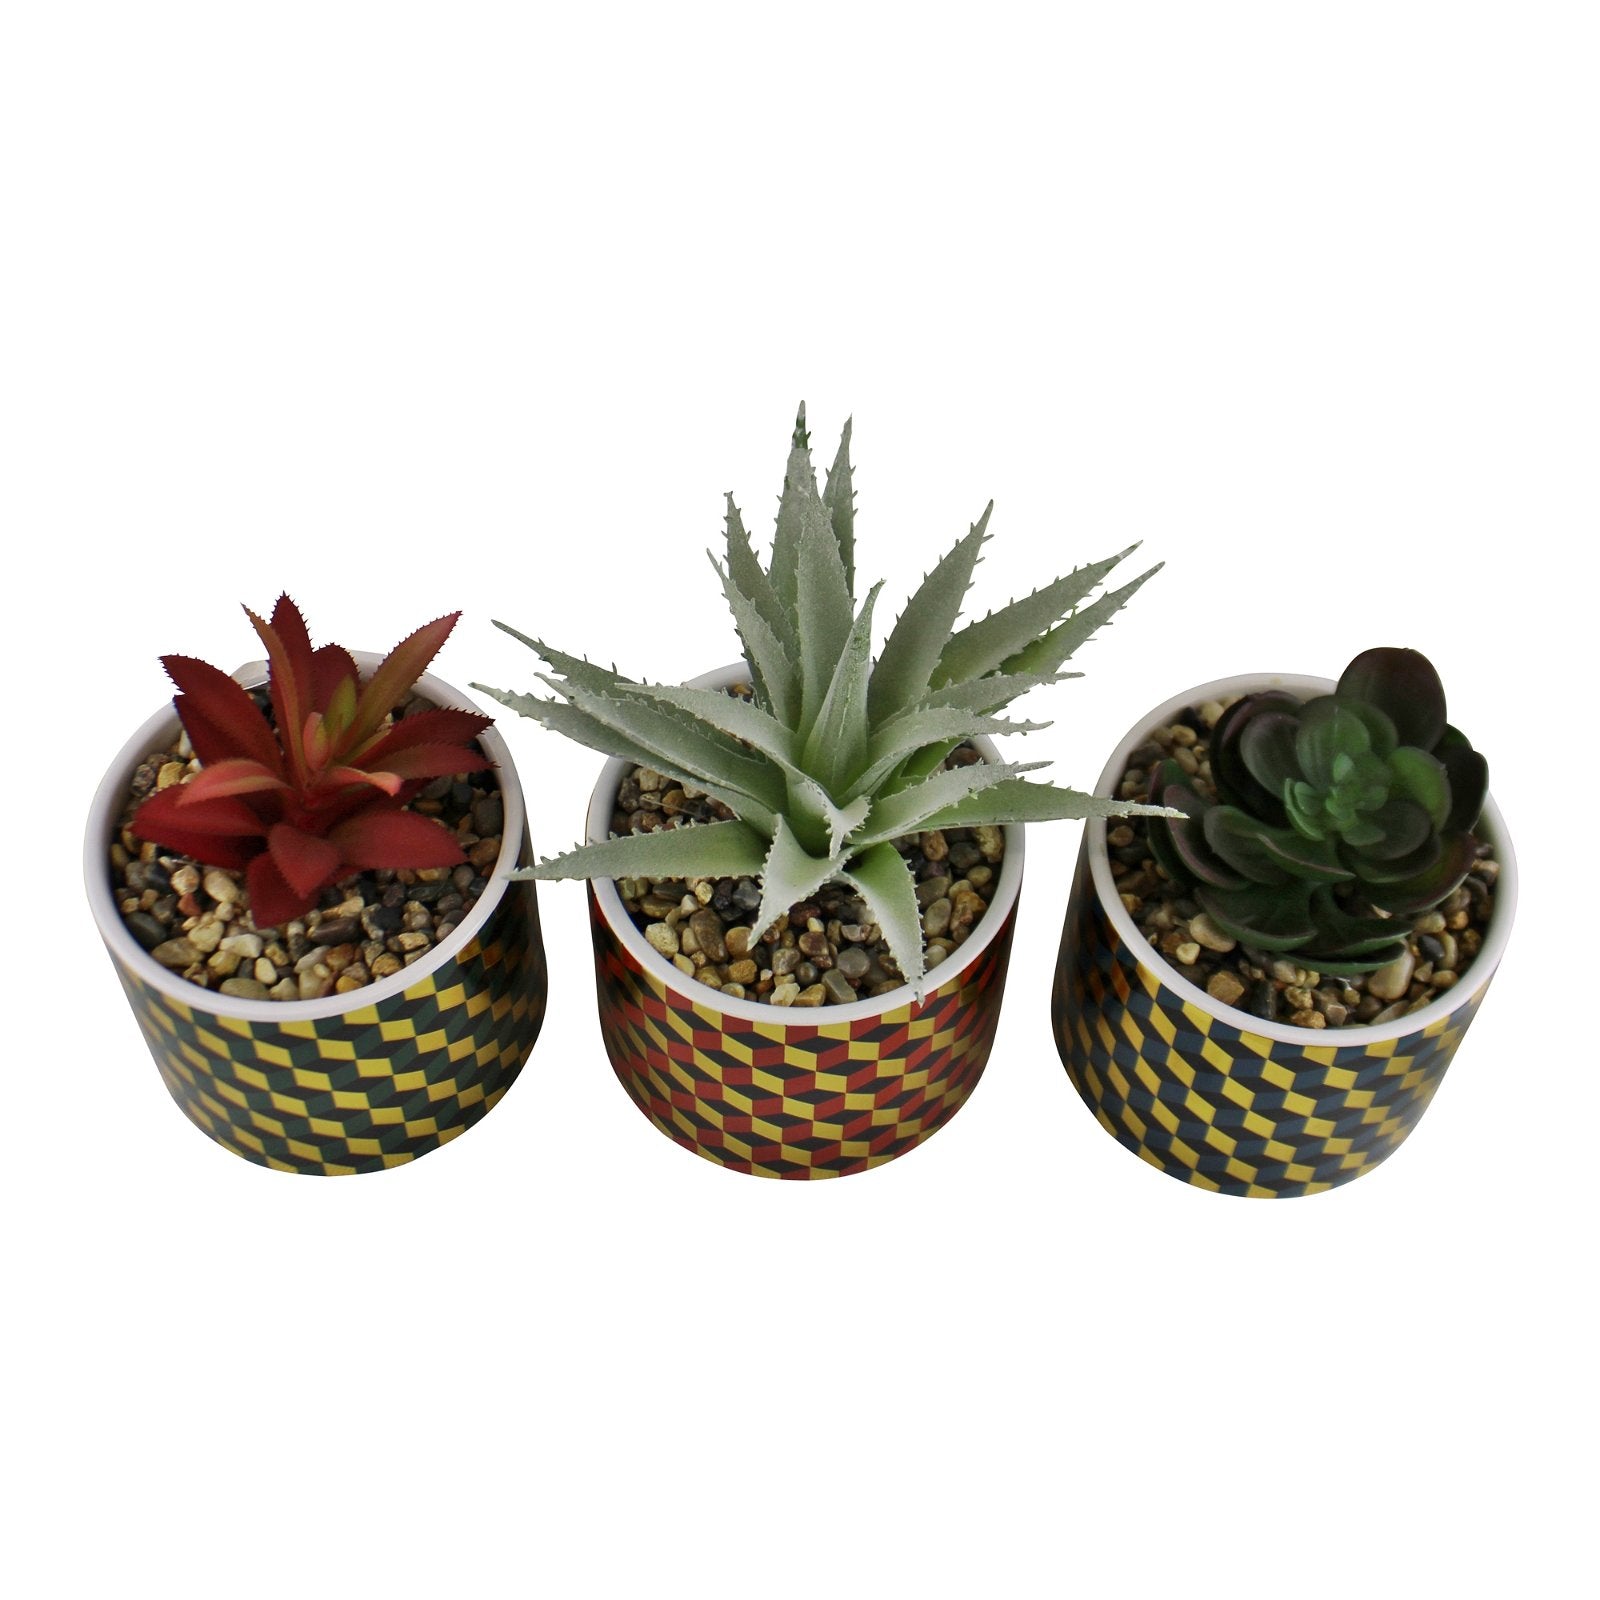 Set of 3 Succulents In Ceramic Pots With A Cubic Design